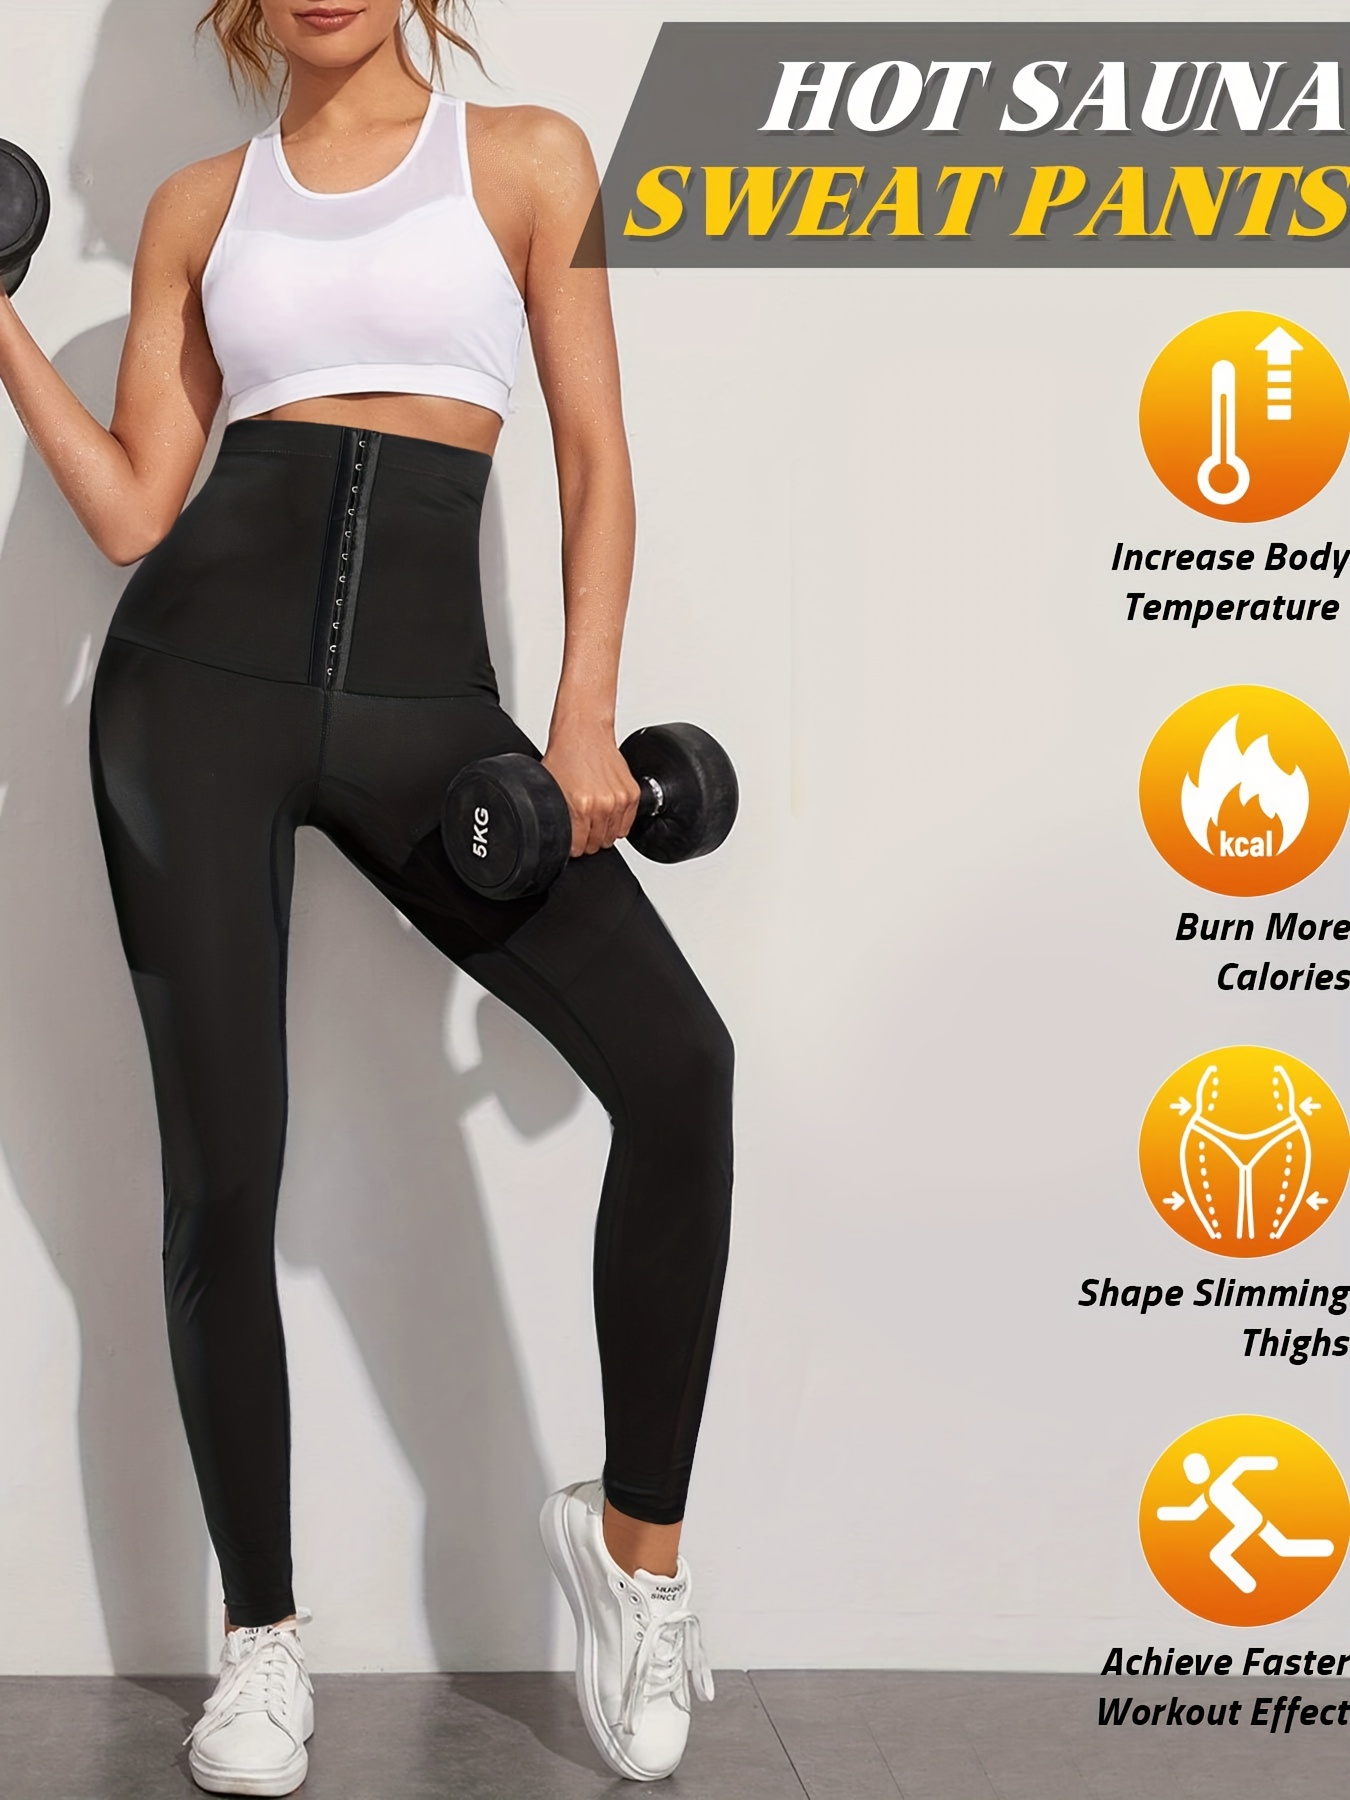 LANCS Women Sauna Leggings Sweat Pants High Waist Slimming Hot Thermo  Compression Workout Fitness Exercise Tights Body Shaper price in UAE,  UAE